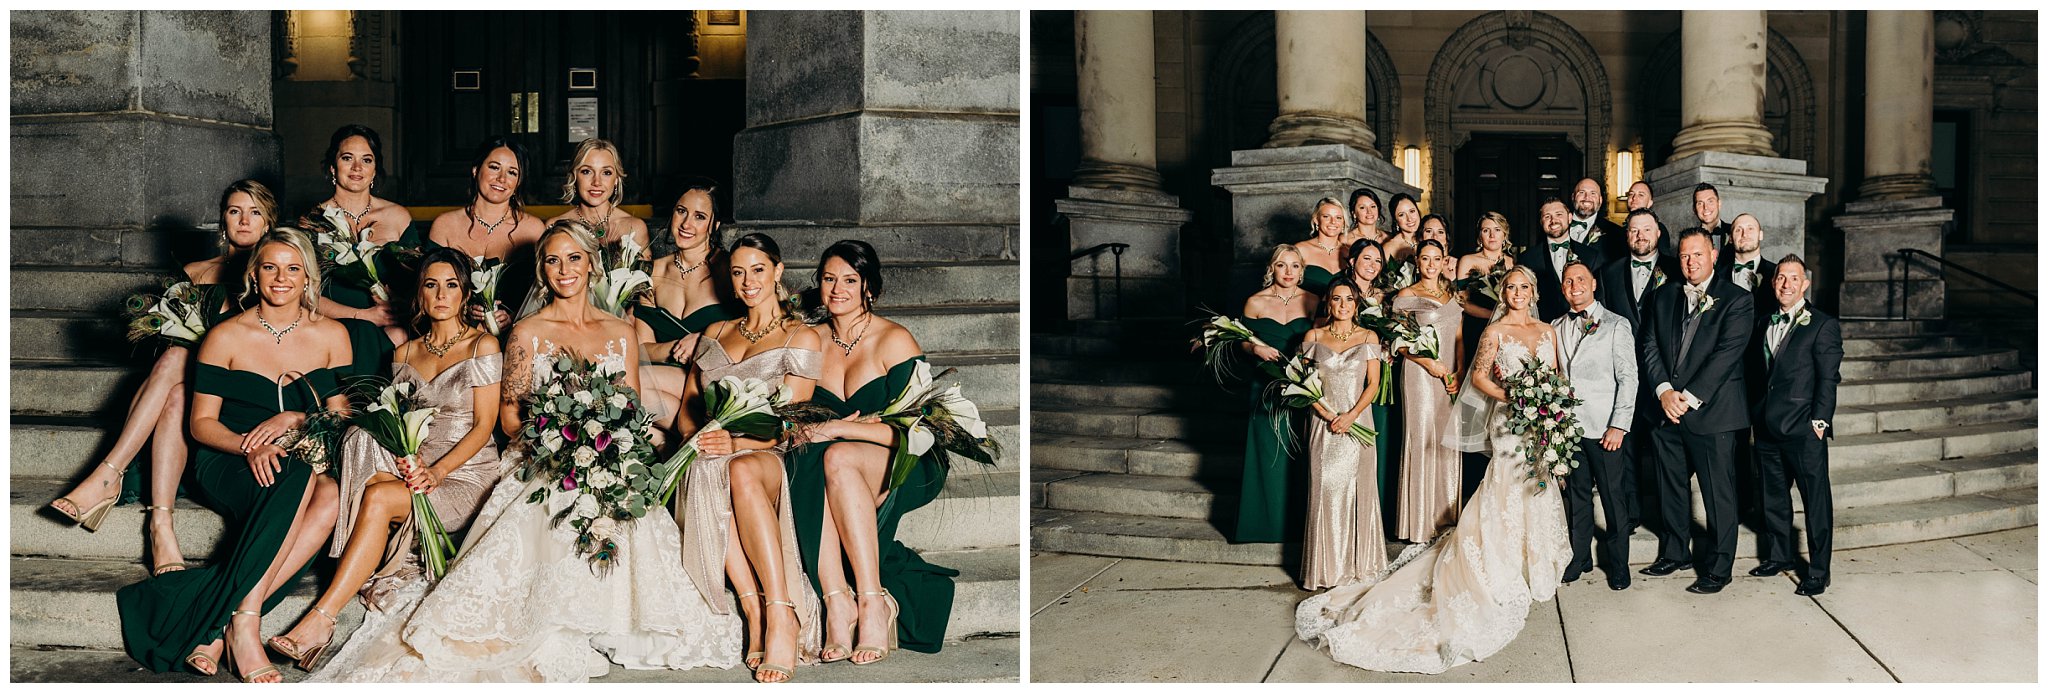 Wedding Portraits in Pittsburgh PA